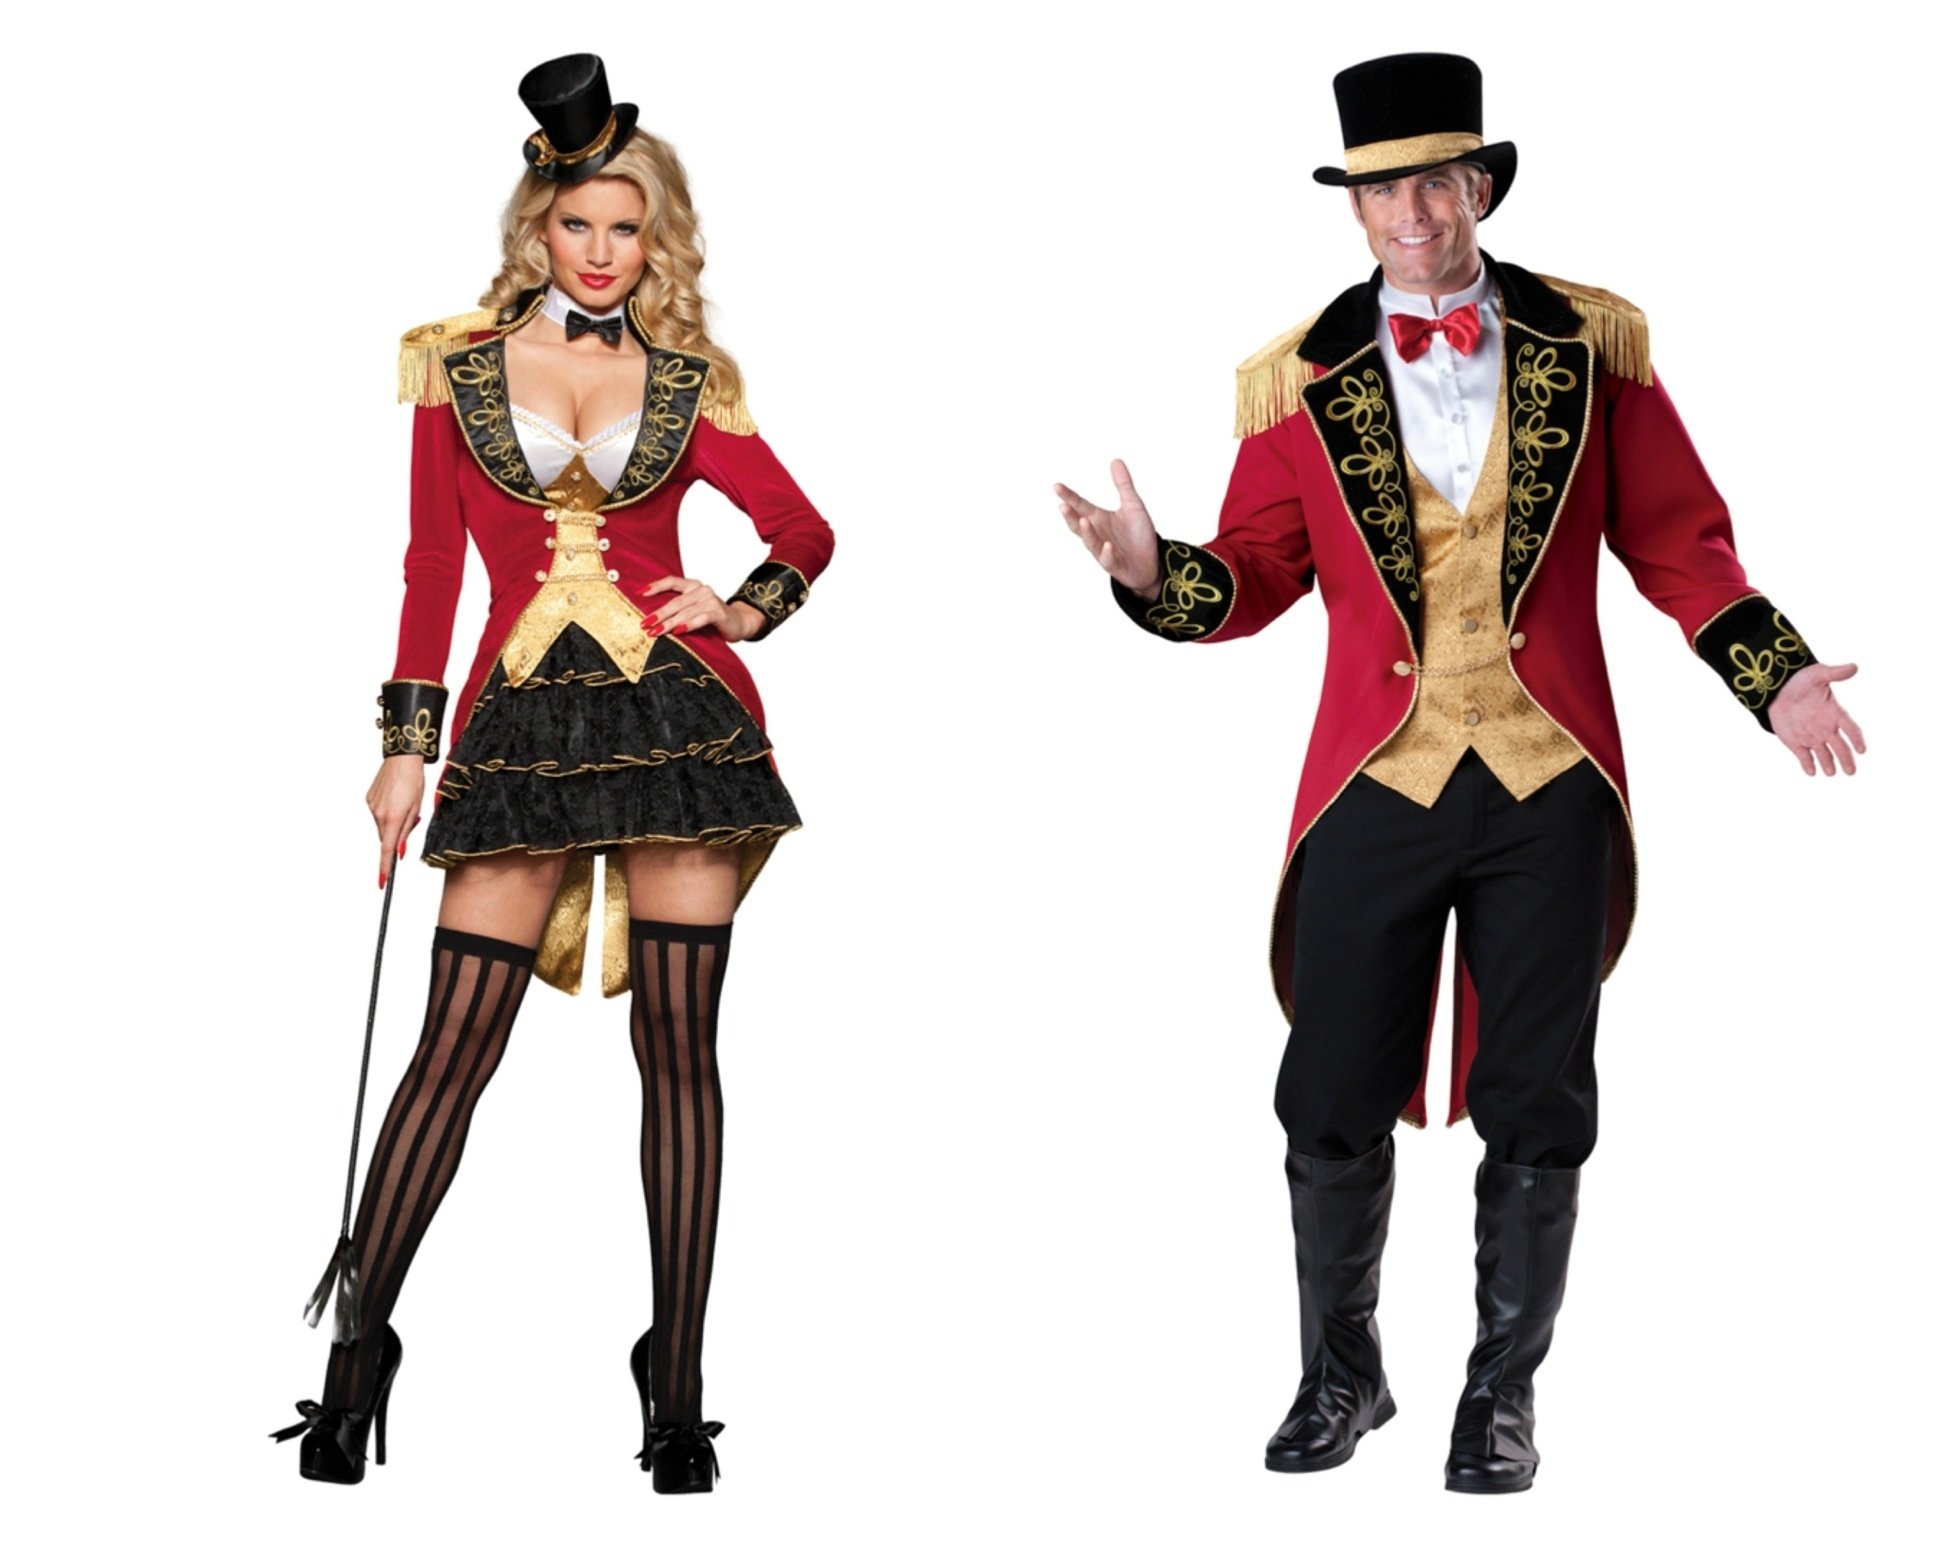 10 Lovely His And Hers Halloween Costume Ideas his and hers ringleader costumes for couples other ideas lion 2023